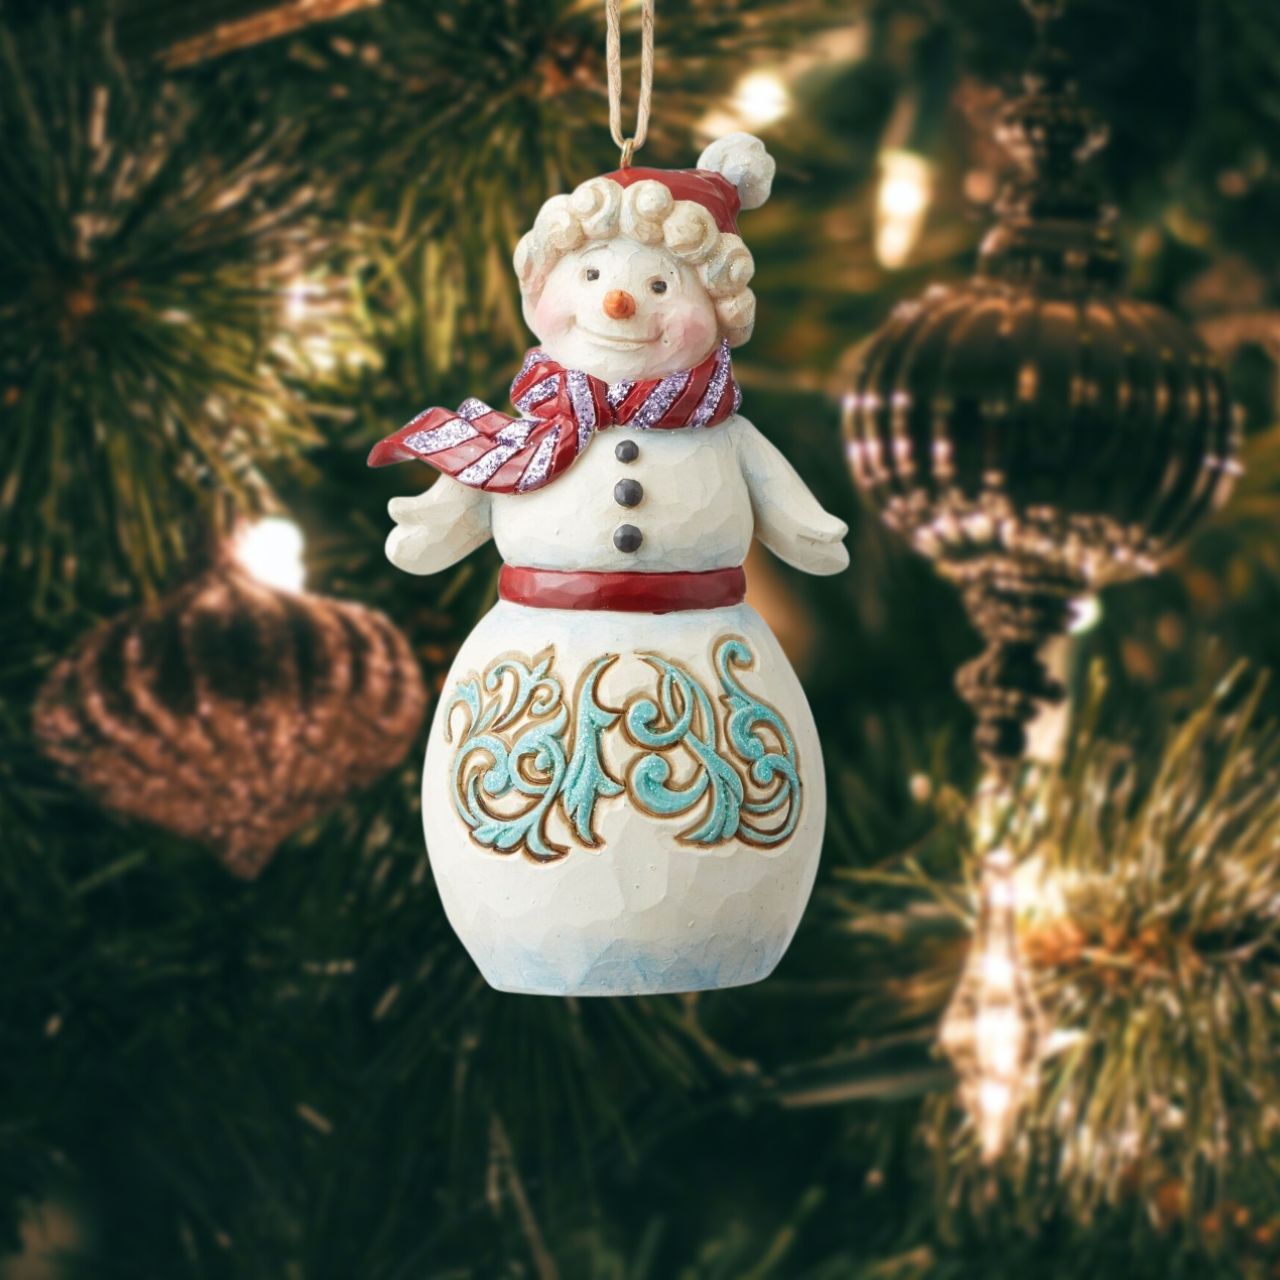 Jim Shore Heartwood Creek Winter Wonderland Snowman Hanging Ornament  Jim Shore's Winter Wonderland collection features a subtle glitter finish with Jim's signature color and intricate design. This whimsical holiday Snowman ornament with knit cap and scarf is strikingly decorated with a bold blue rosemaling motif.